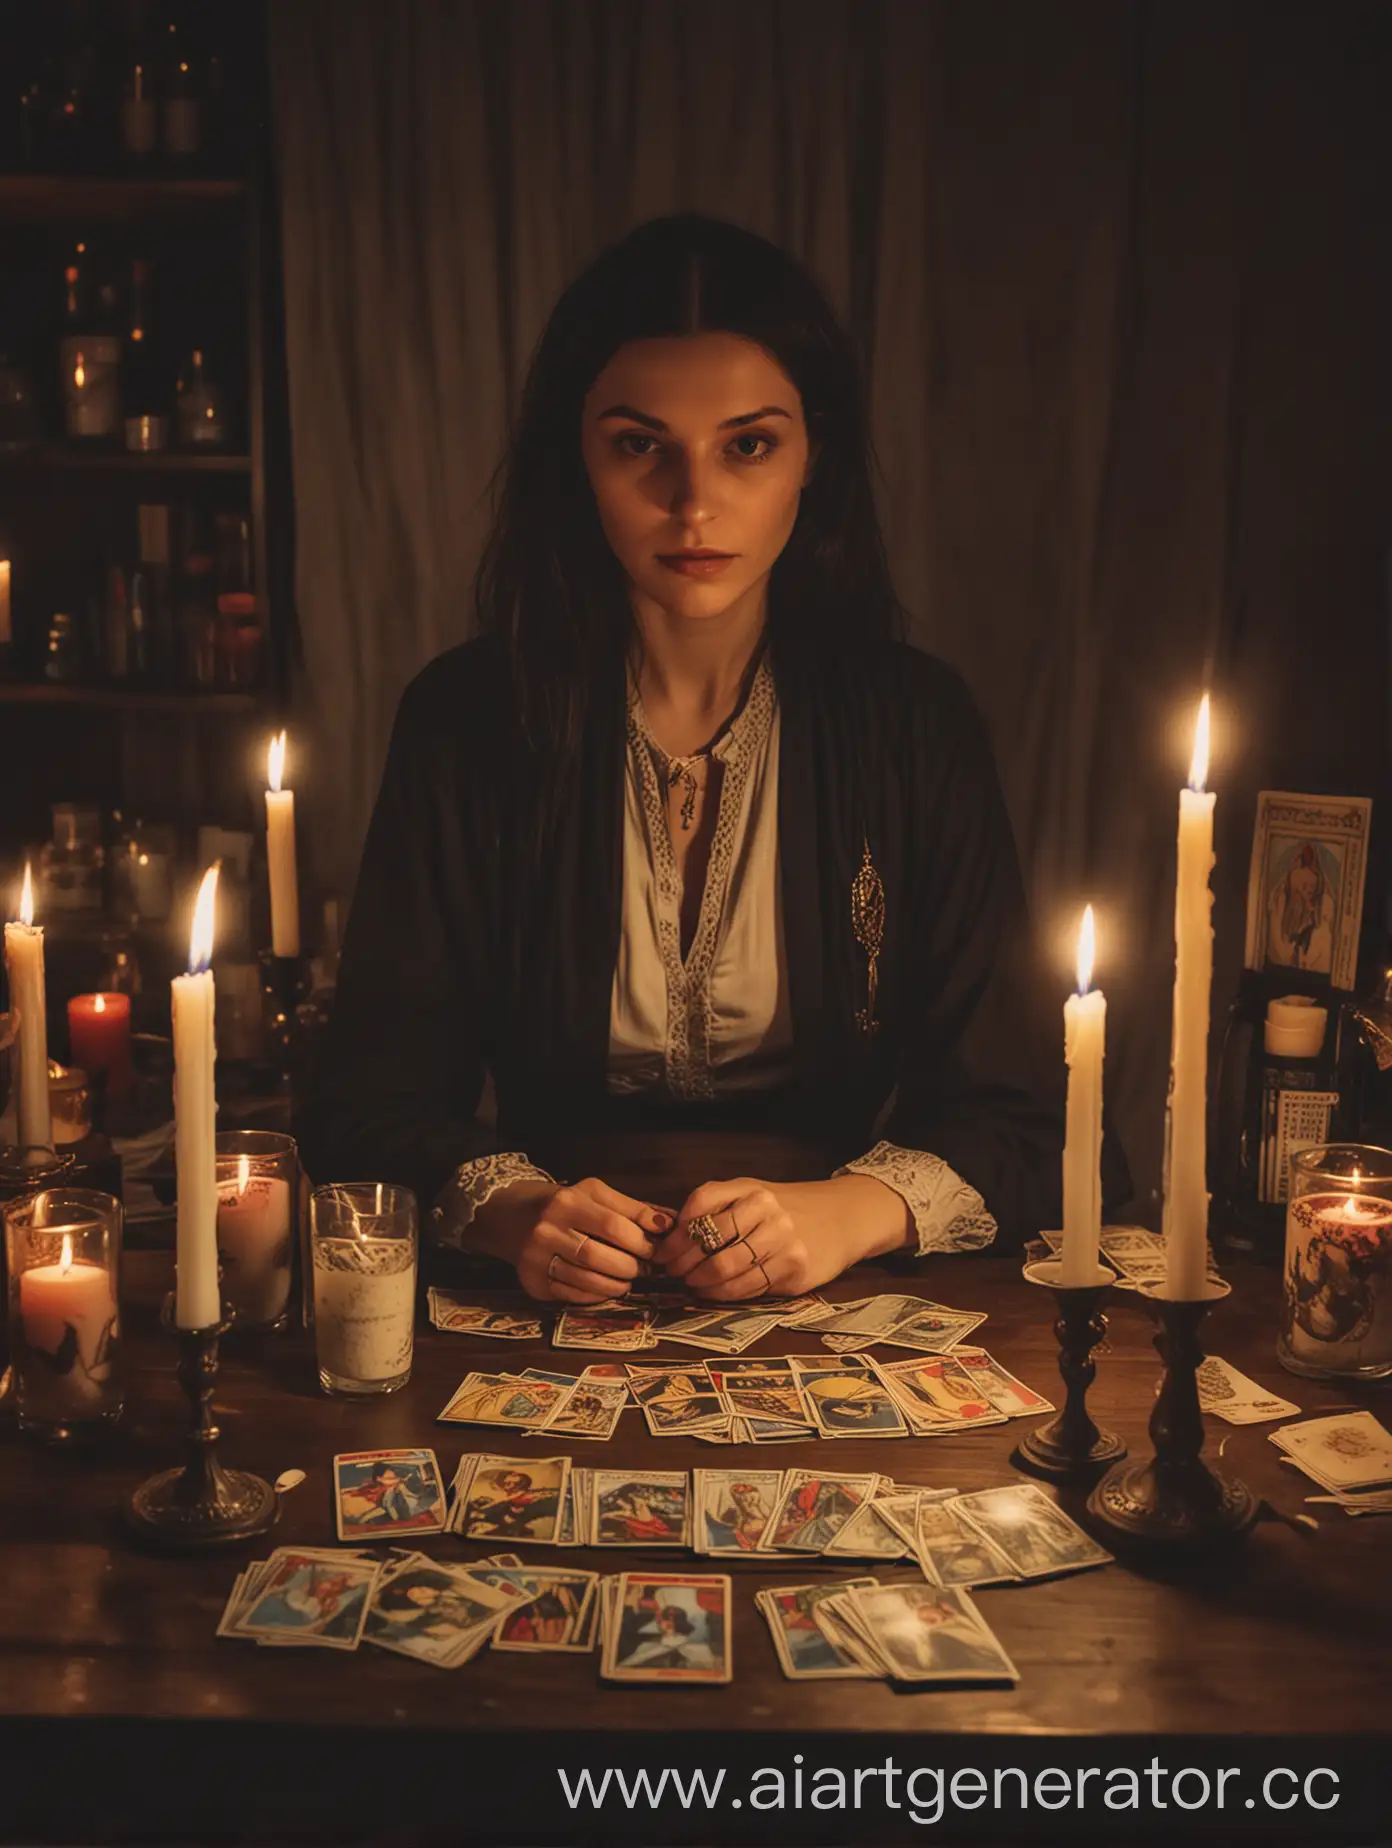 Candlelit-Tarot-Card-Reading-by-a-Woman-in-Elegant-Attire